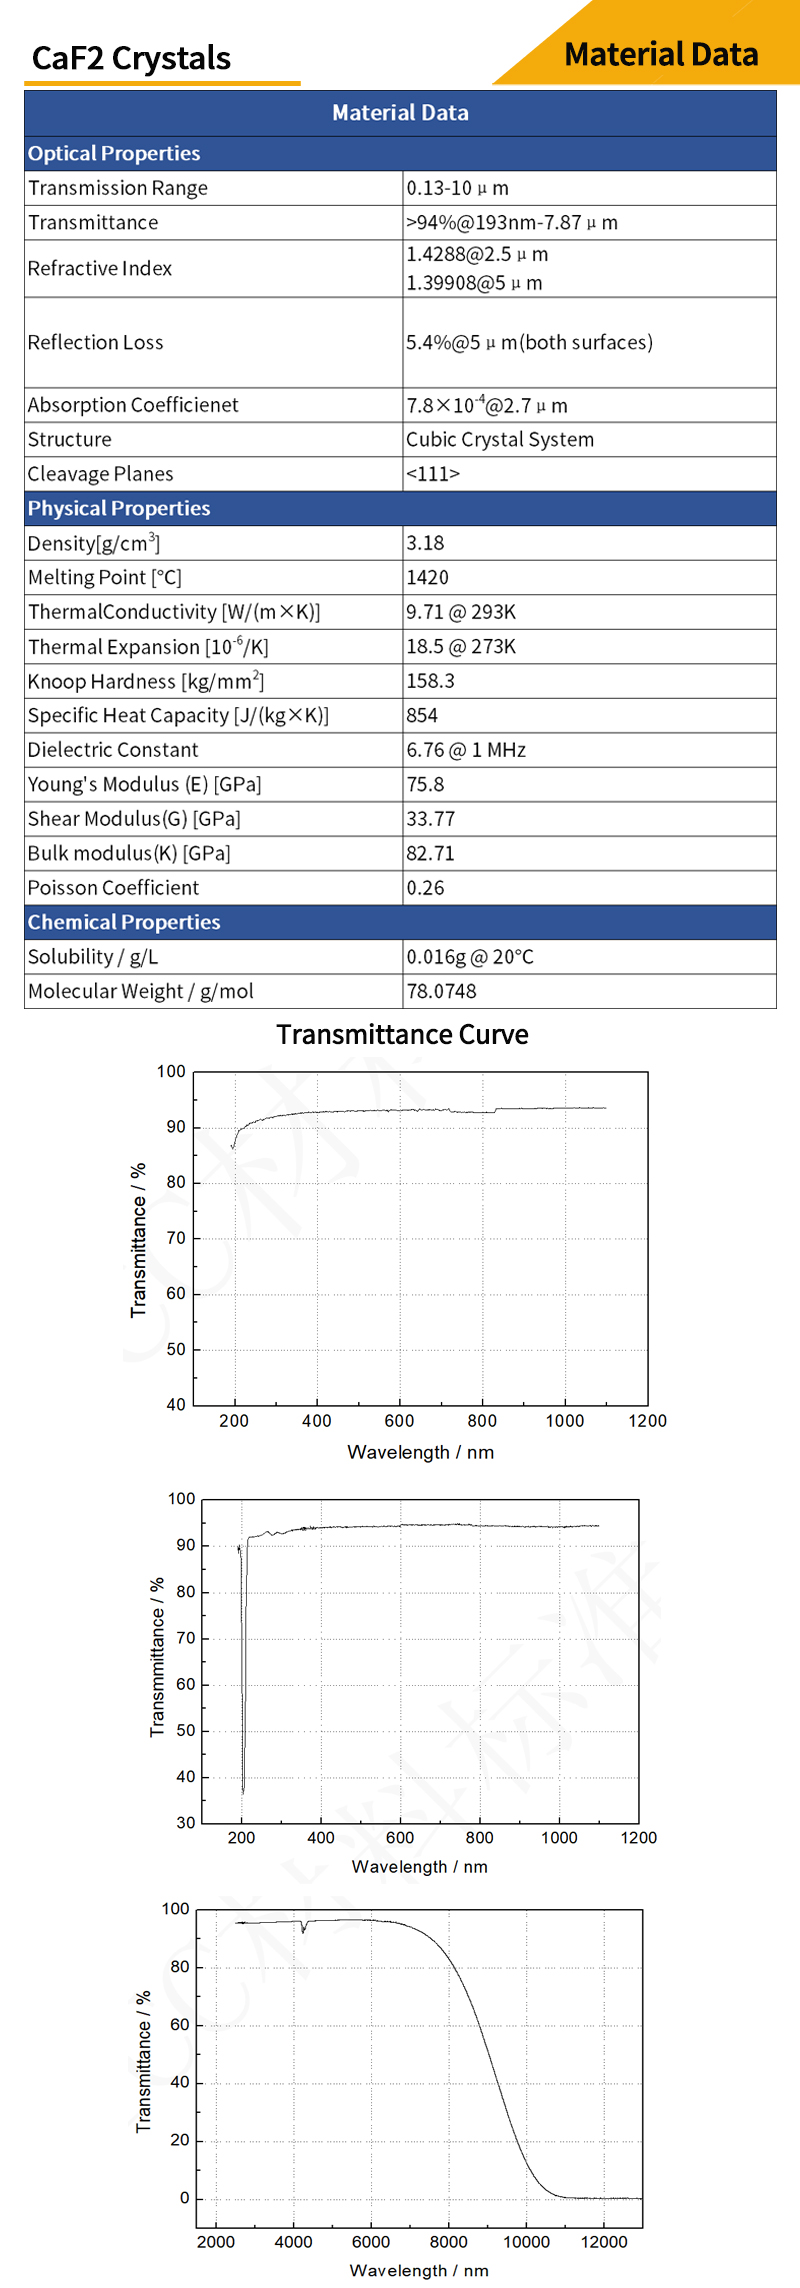 Single Crystals calcium fluoride material data and transmittance curves